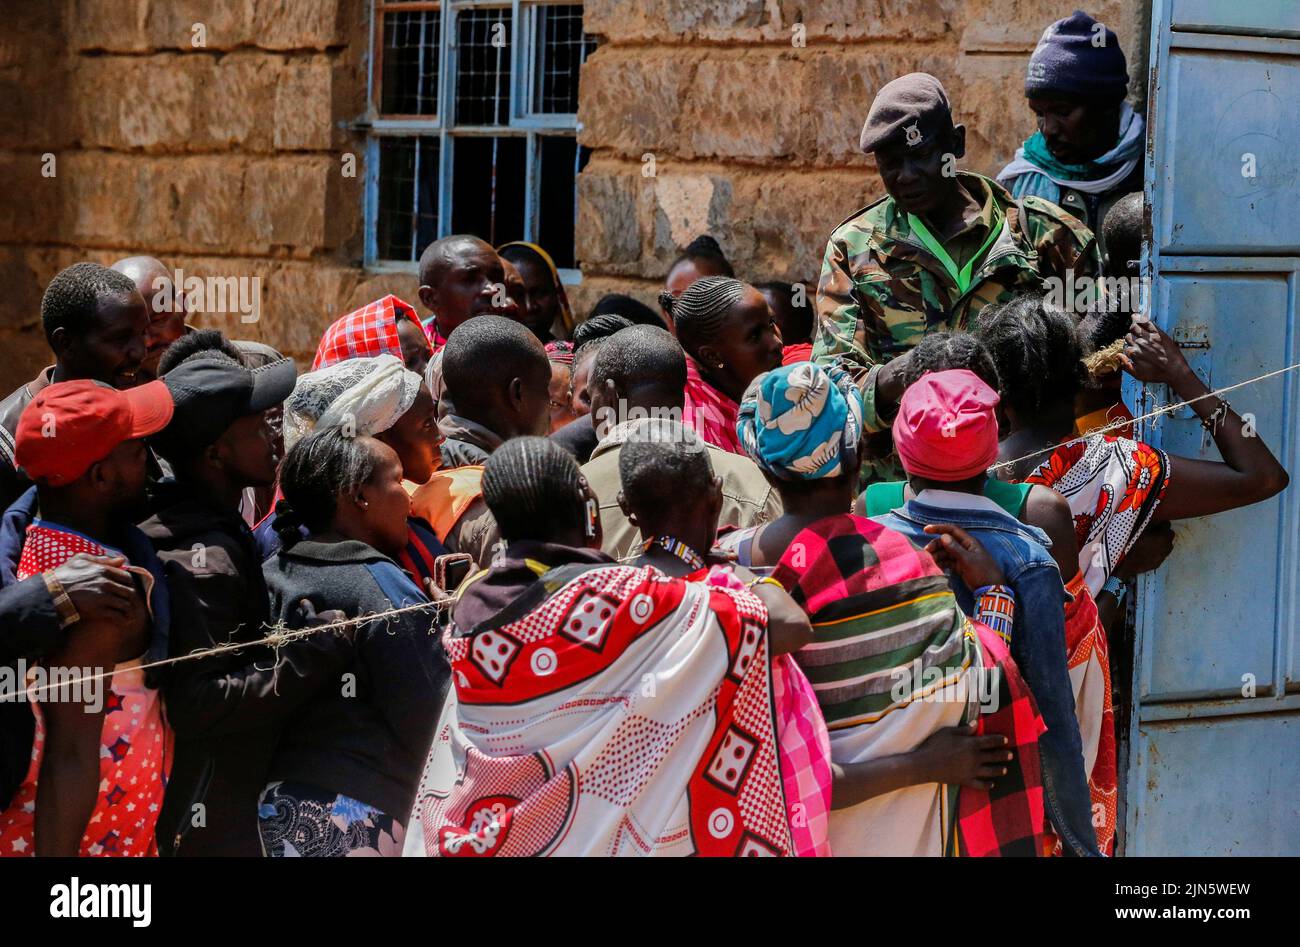 A police officer controls Maasai traditional people at a polling centre before casting their ballots during the general election by the Independent Electoral and Boundaries Commission (IEBC) at Ewaso Kedong primary school, in Kajiado county, Kenya August 9, 2022. REUTERS/Thomas Mukoya Stock Photo